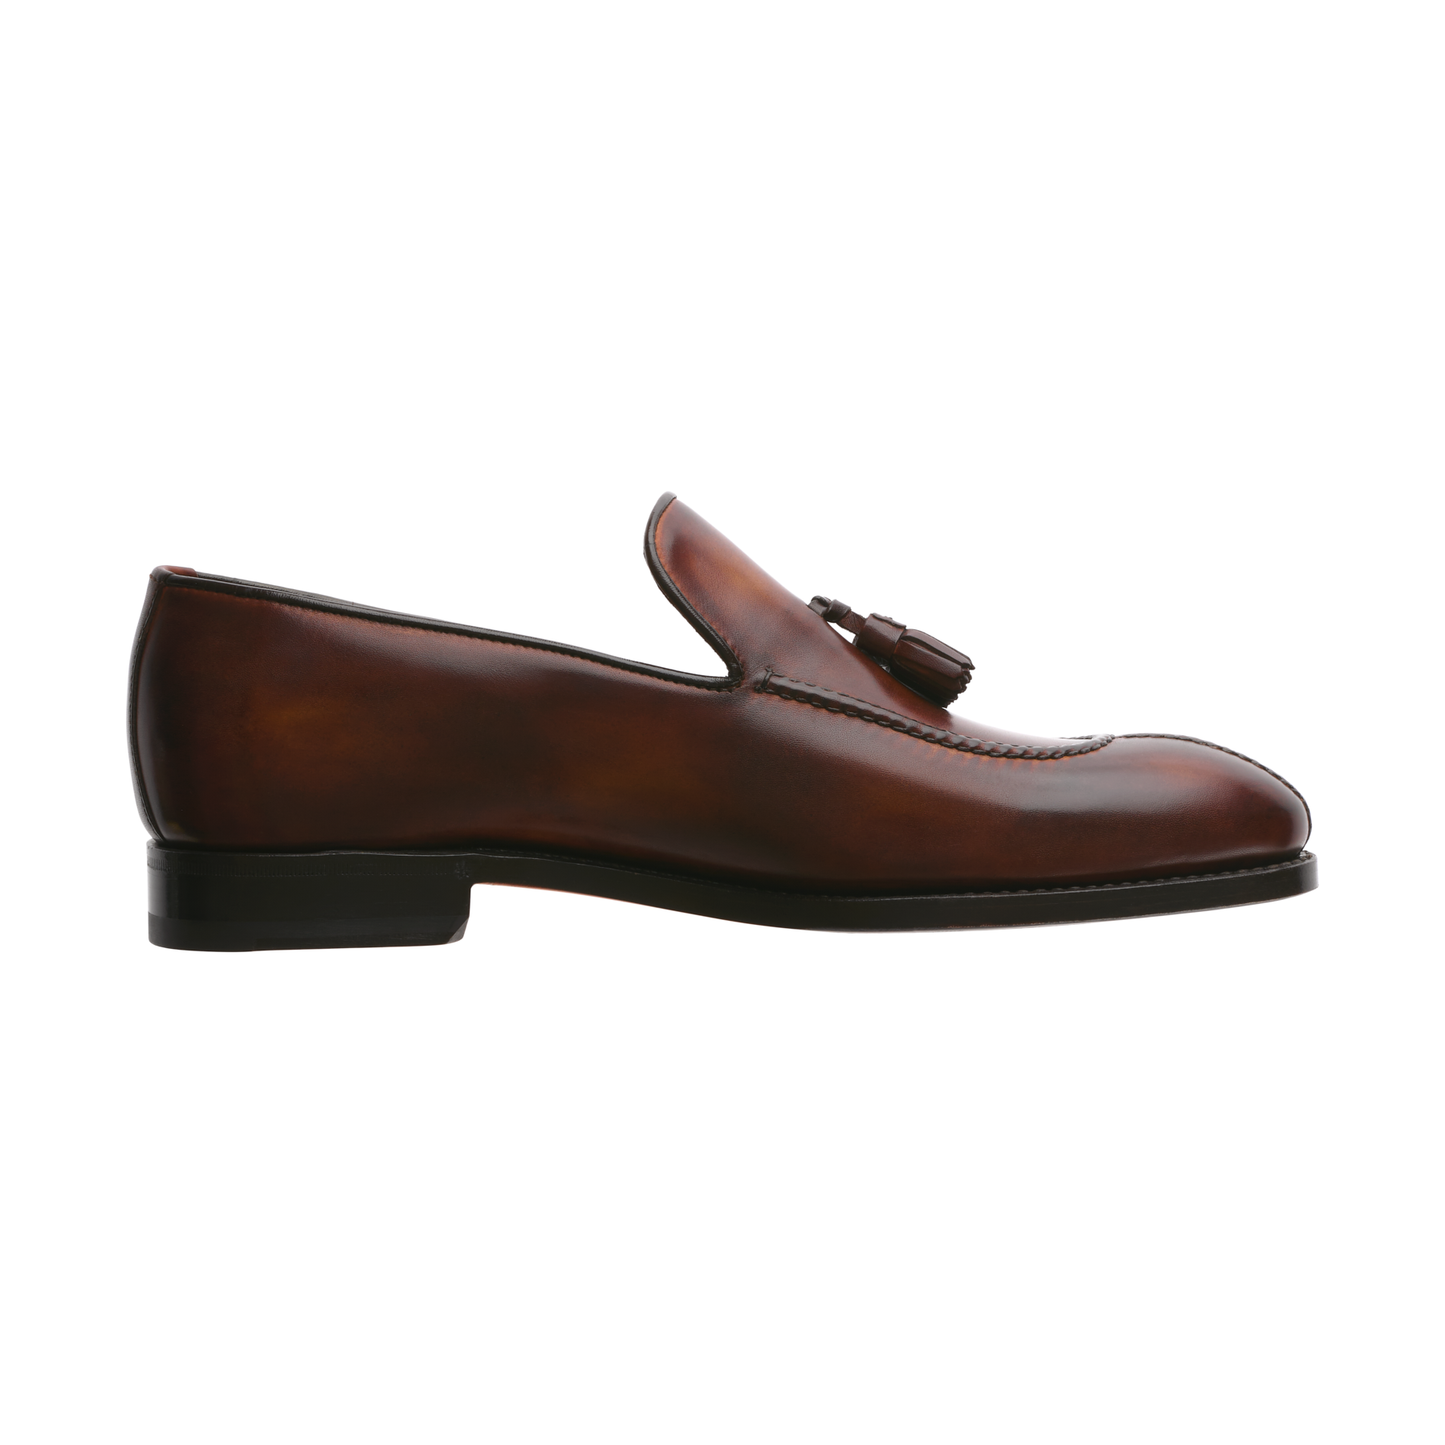 "Magnifico" Split Toe Loafer with Hand-Stitched Details